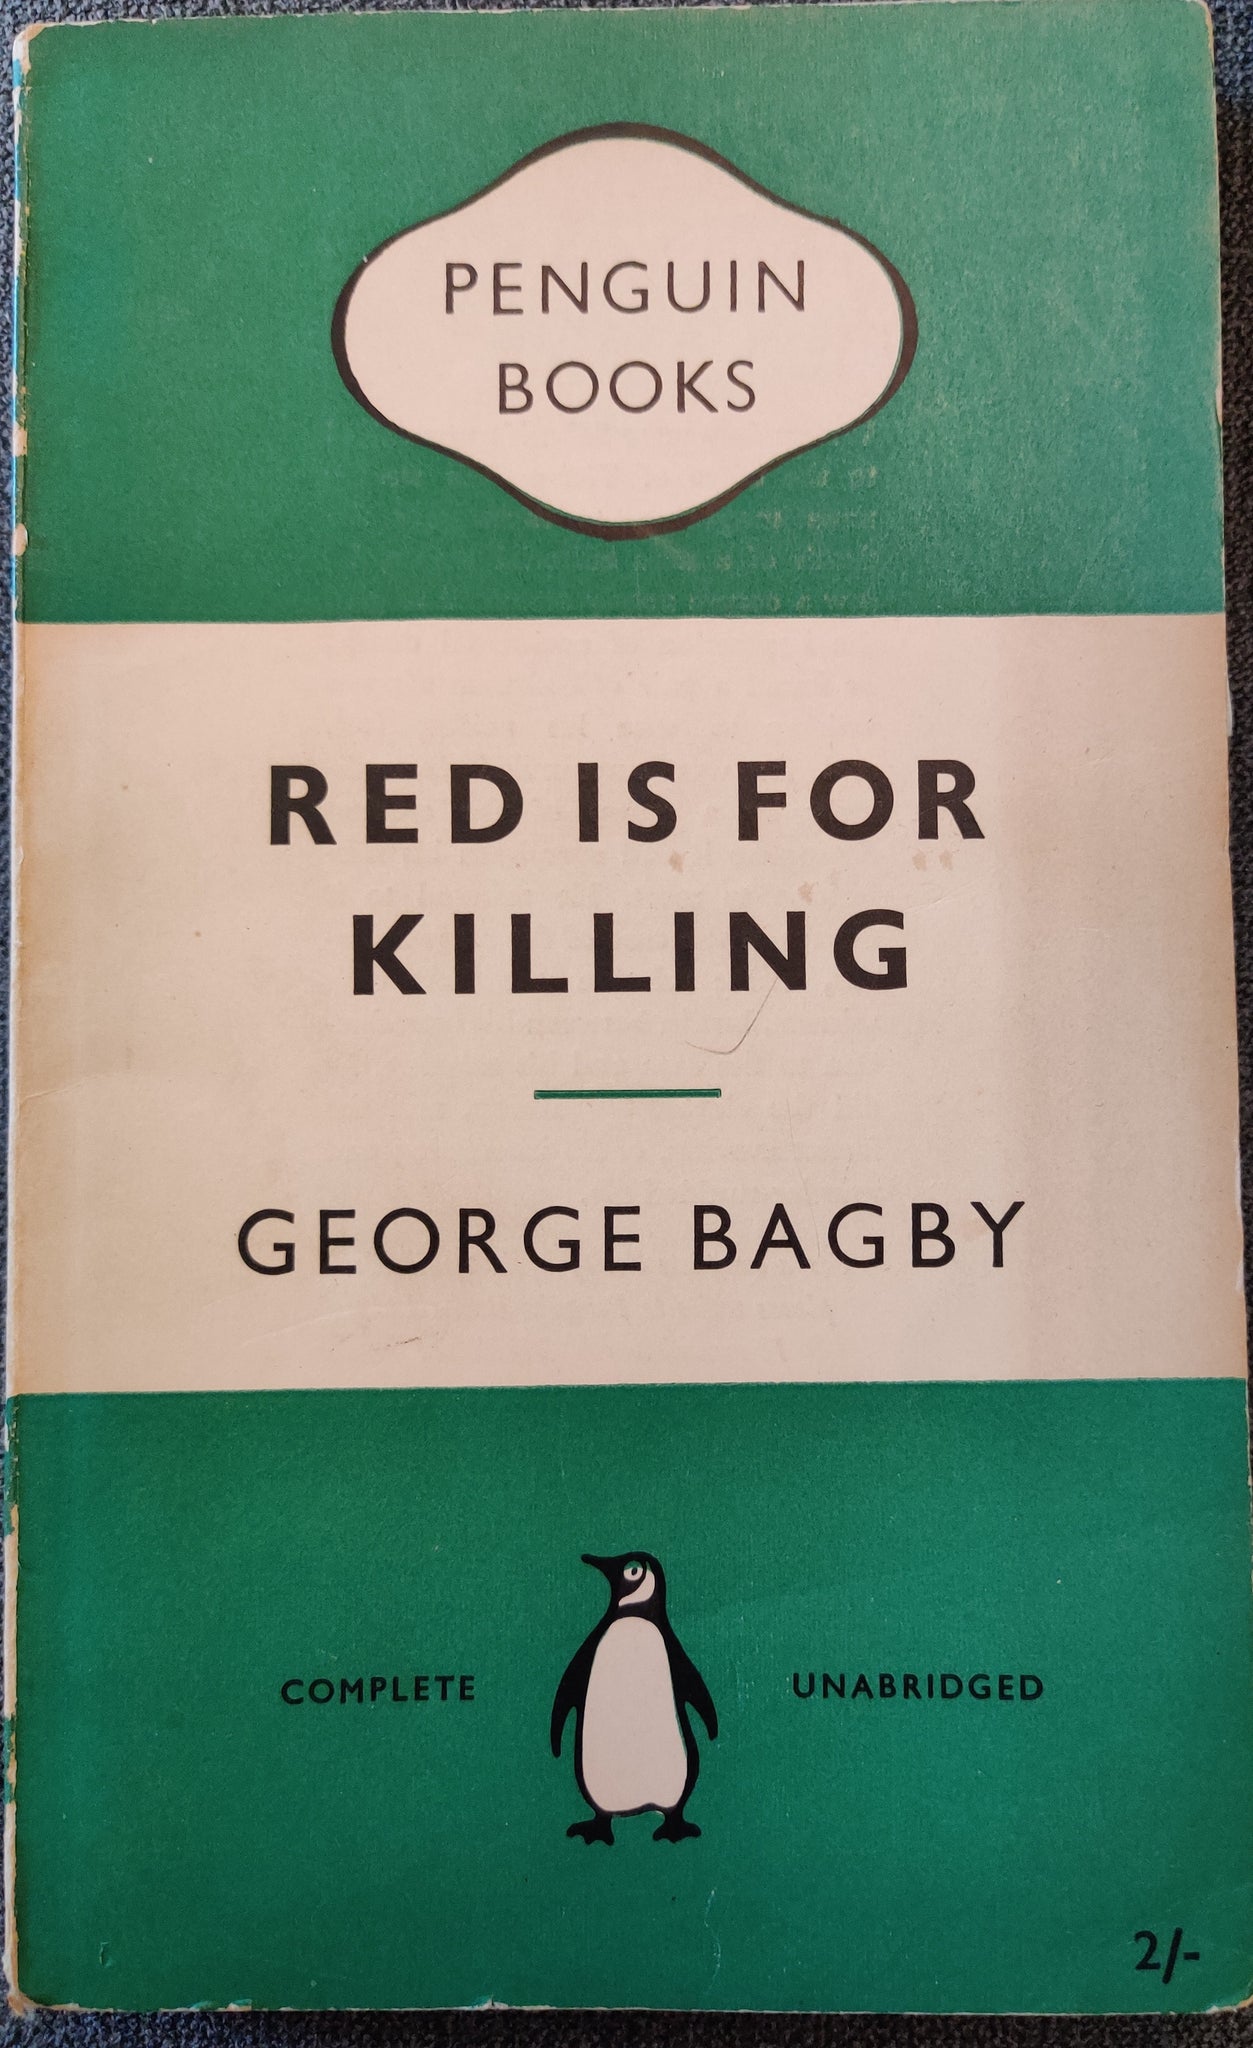 Red Is For Killing by George Bagby